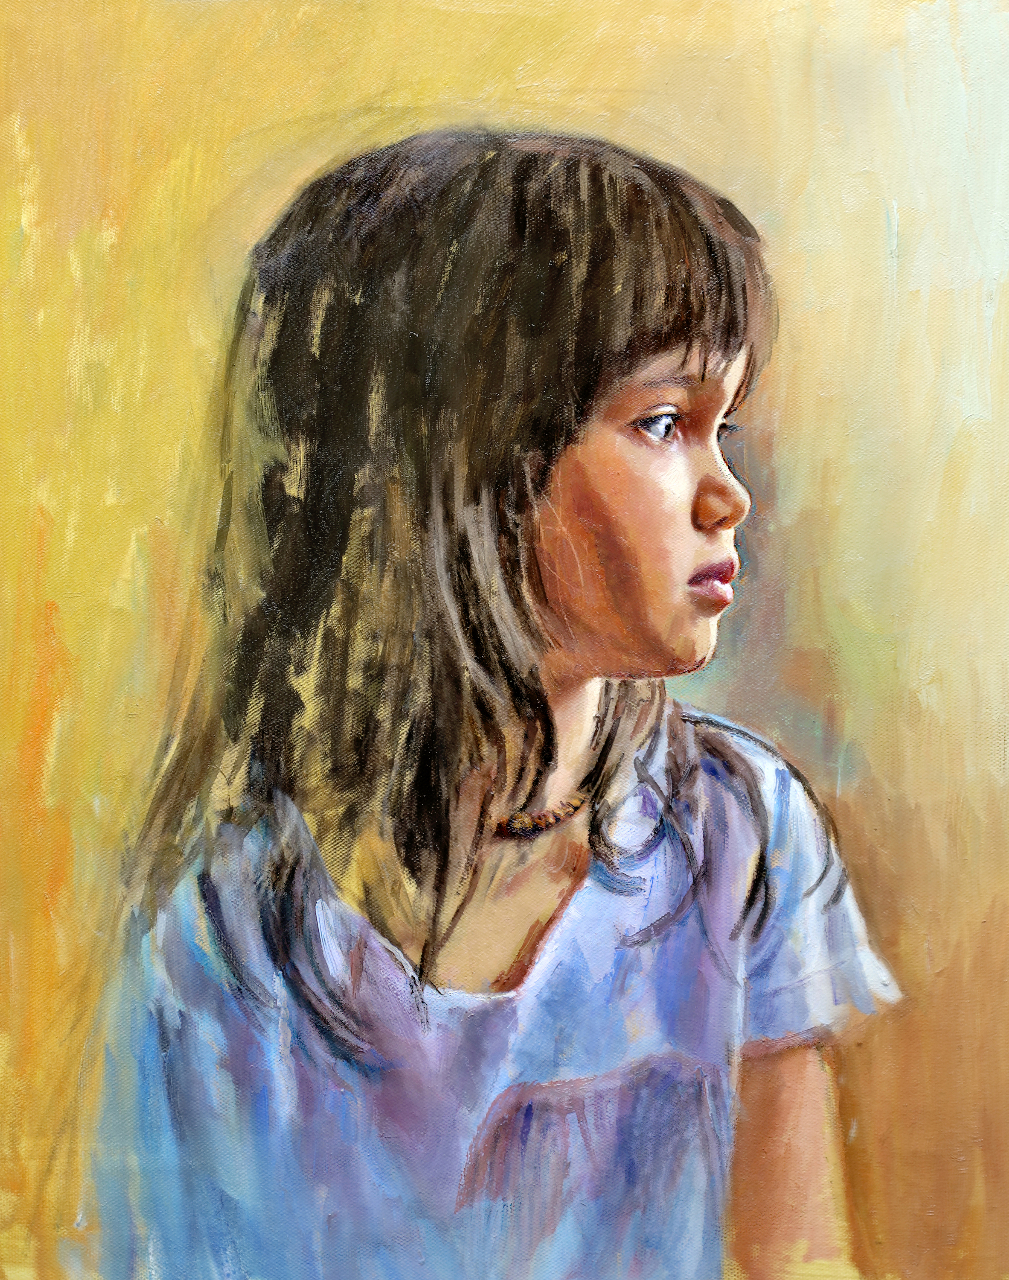 &ldquo;Portrait Painting in Oils of Emilie #3 by Dad&rdquo;